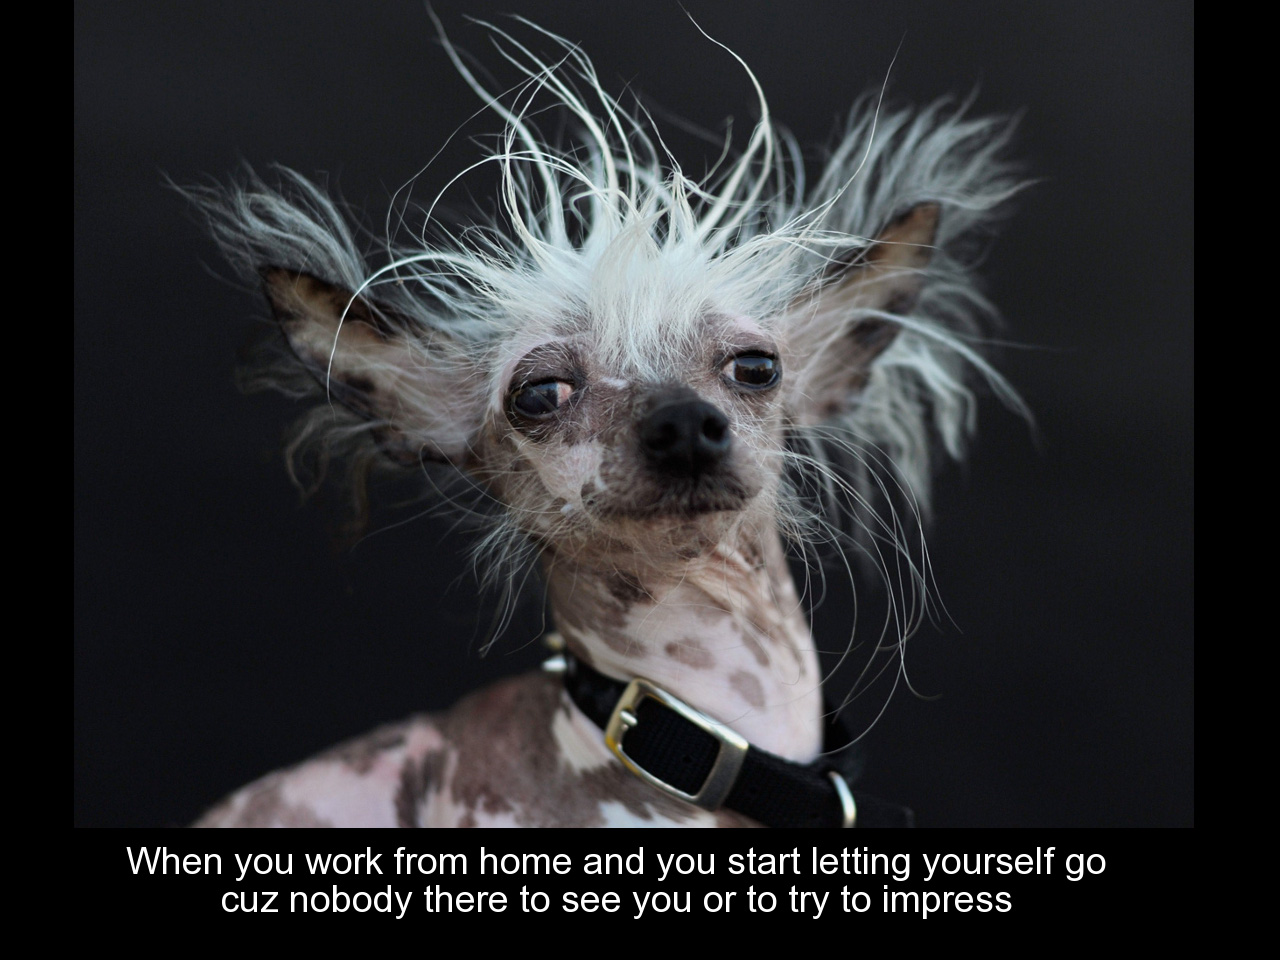 worlds ugliest dog - When you work from home and you start letting yourself go cuz nobody there to see you or to try to impress